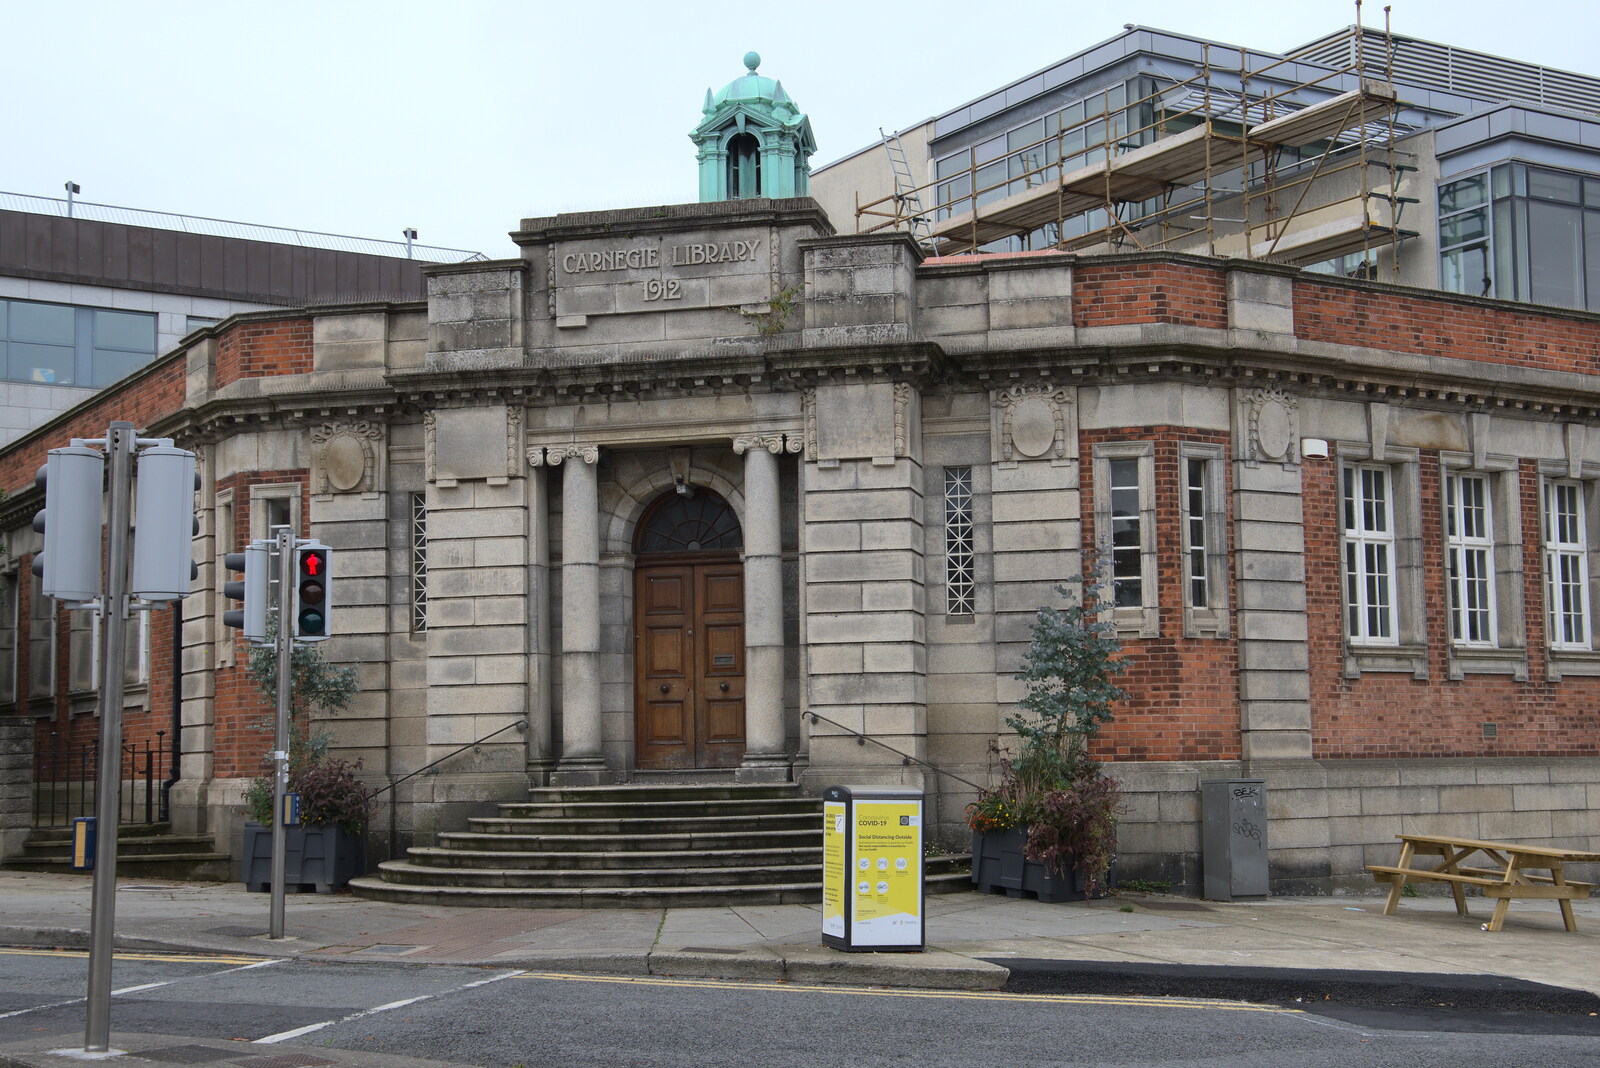 The Carnegie Library from 1912 from Manorhamilton and the Street Art of Dún Laoghaire, Ireland - 15th August 2021